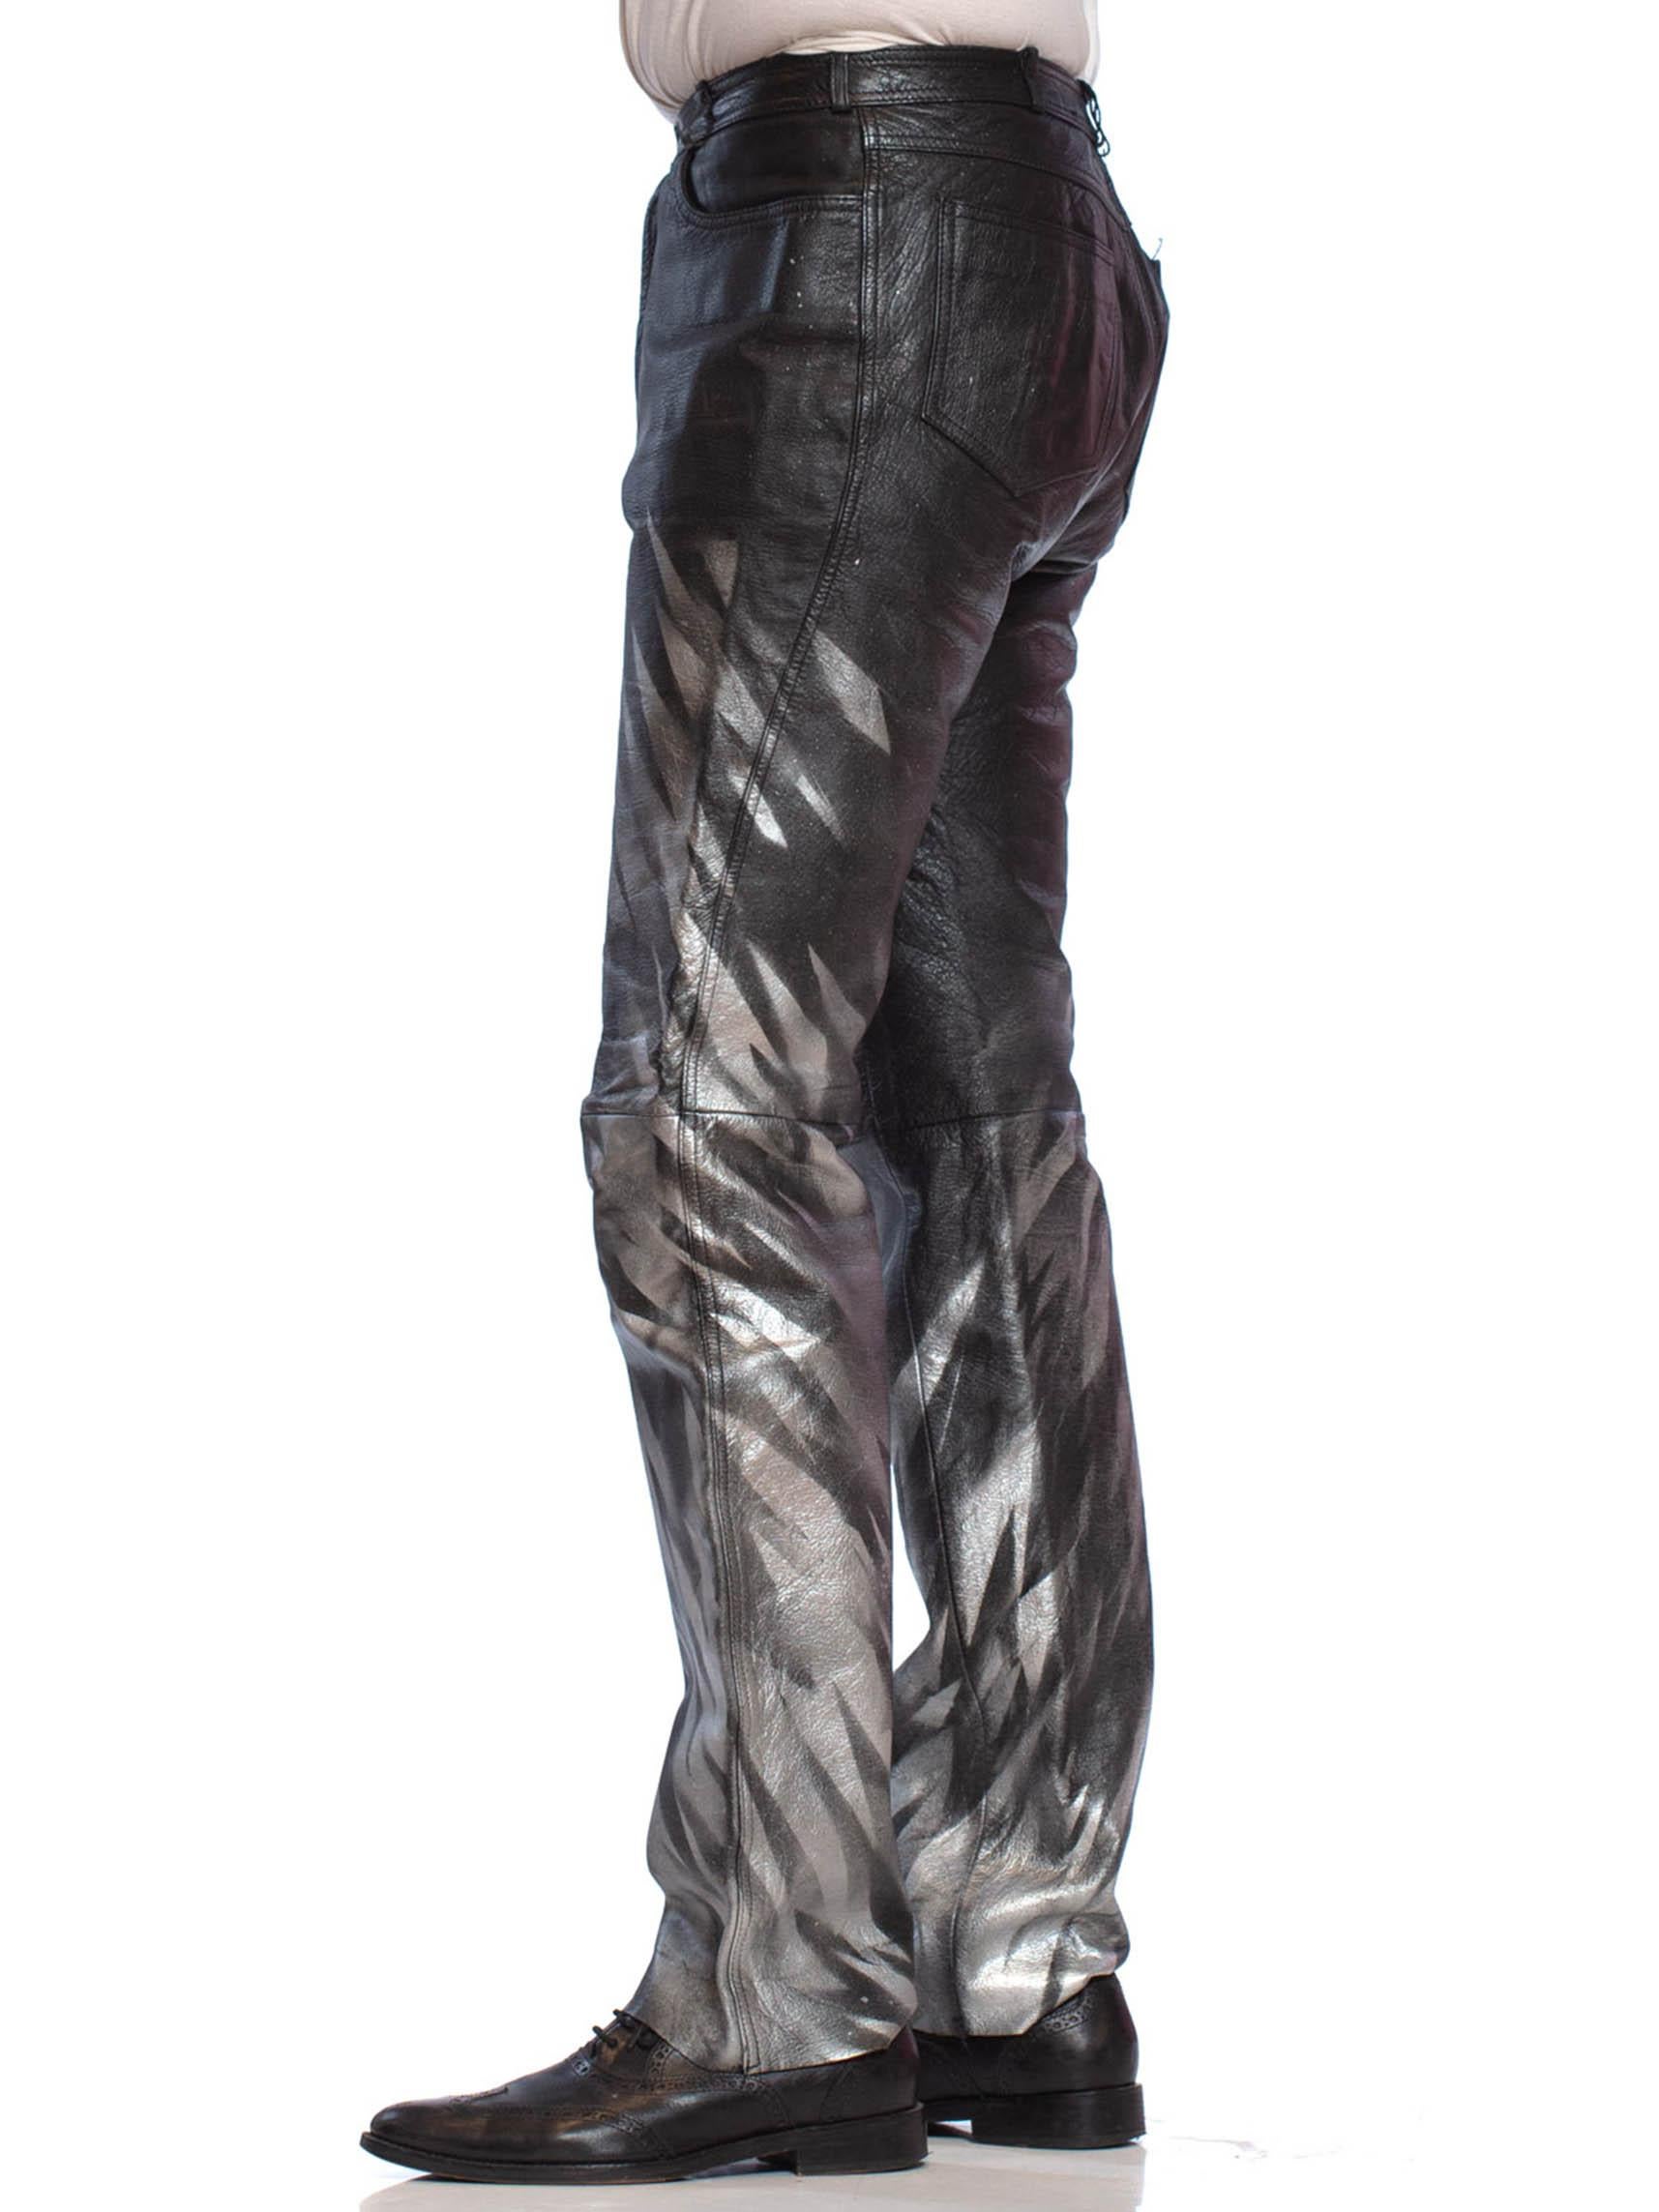 1980S Black Leather Men's Pants With Silver Metallic Graffiti For Sale 1